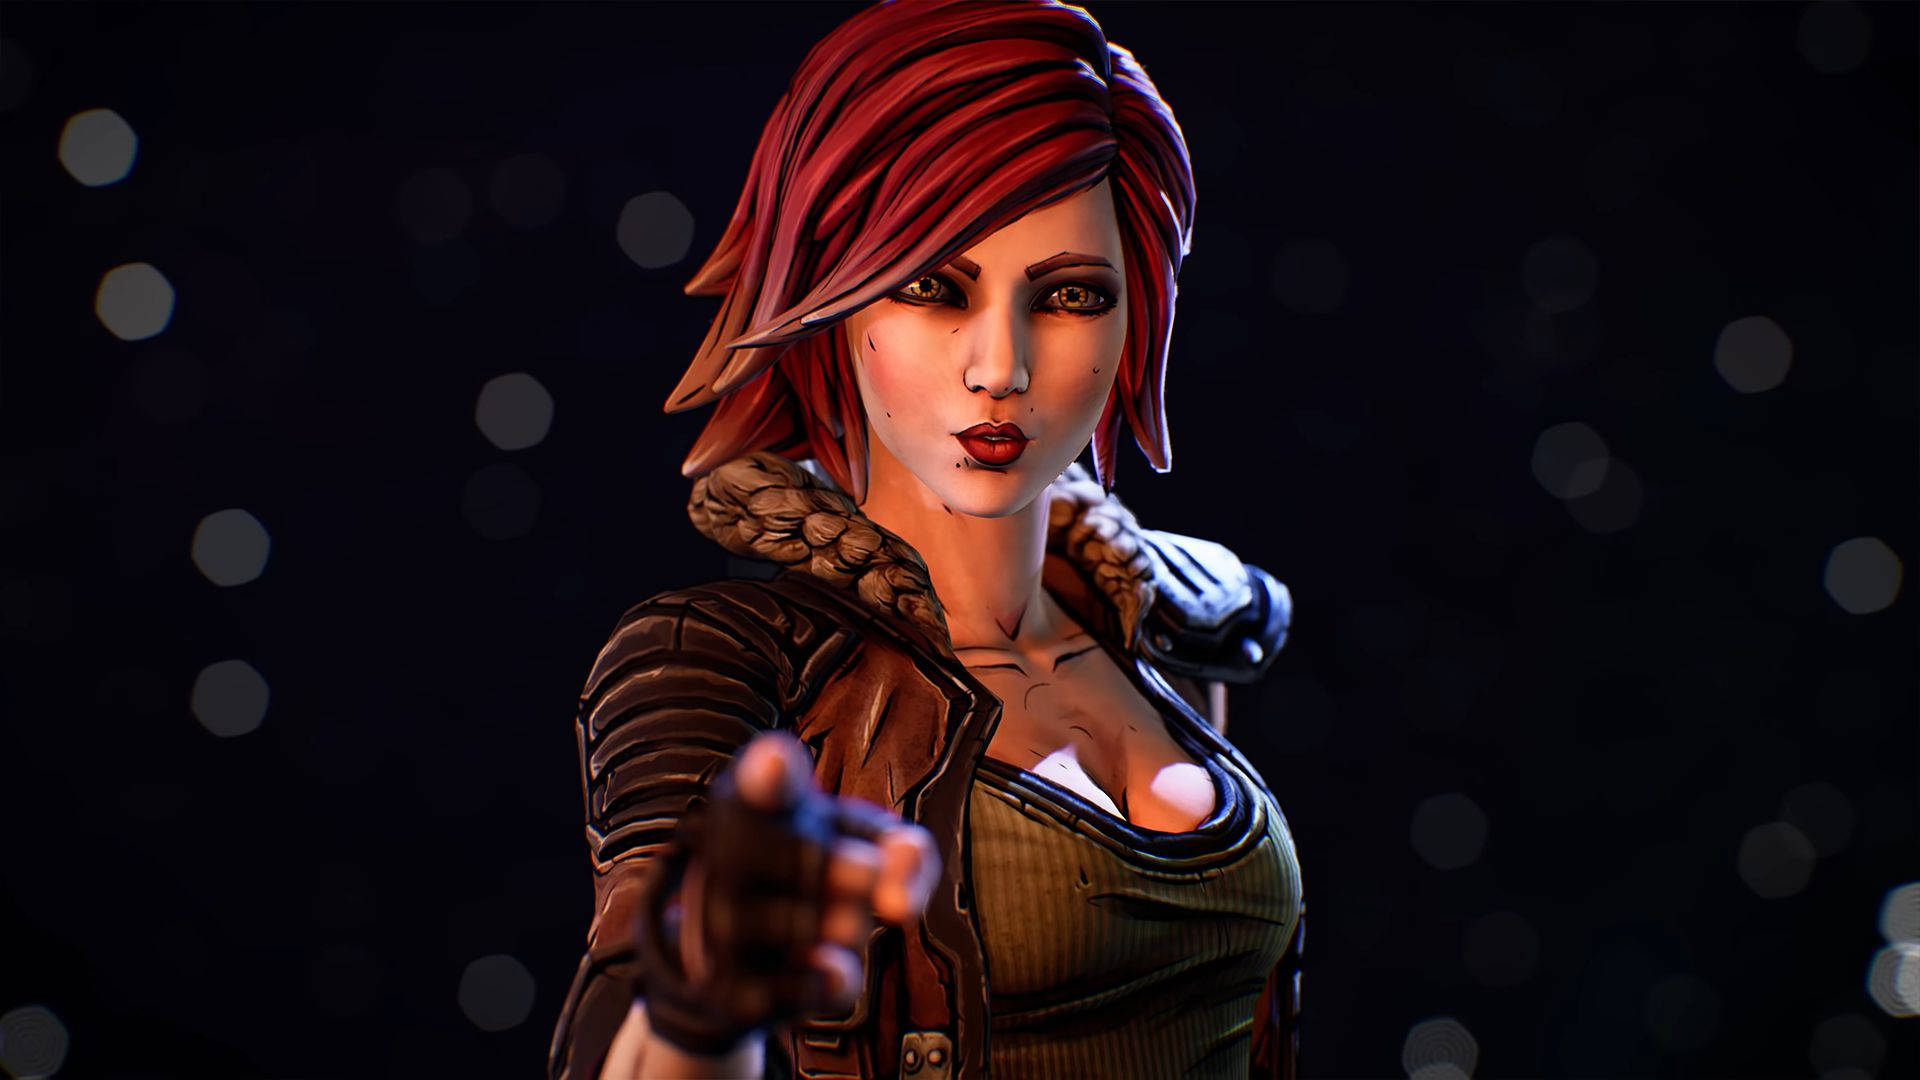 Leave the Past Behind and Venture into the Future - Lilith in Borderlands 3 Wallpaper